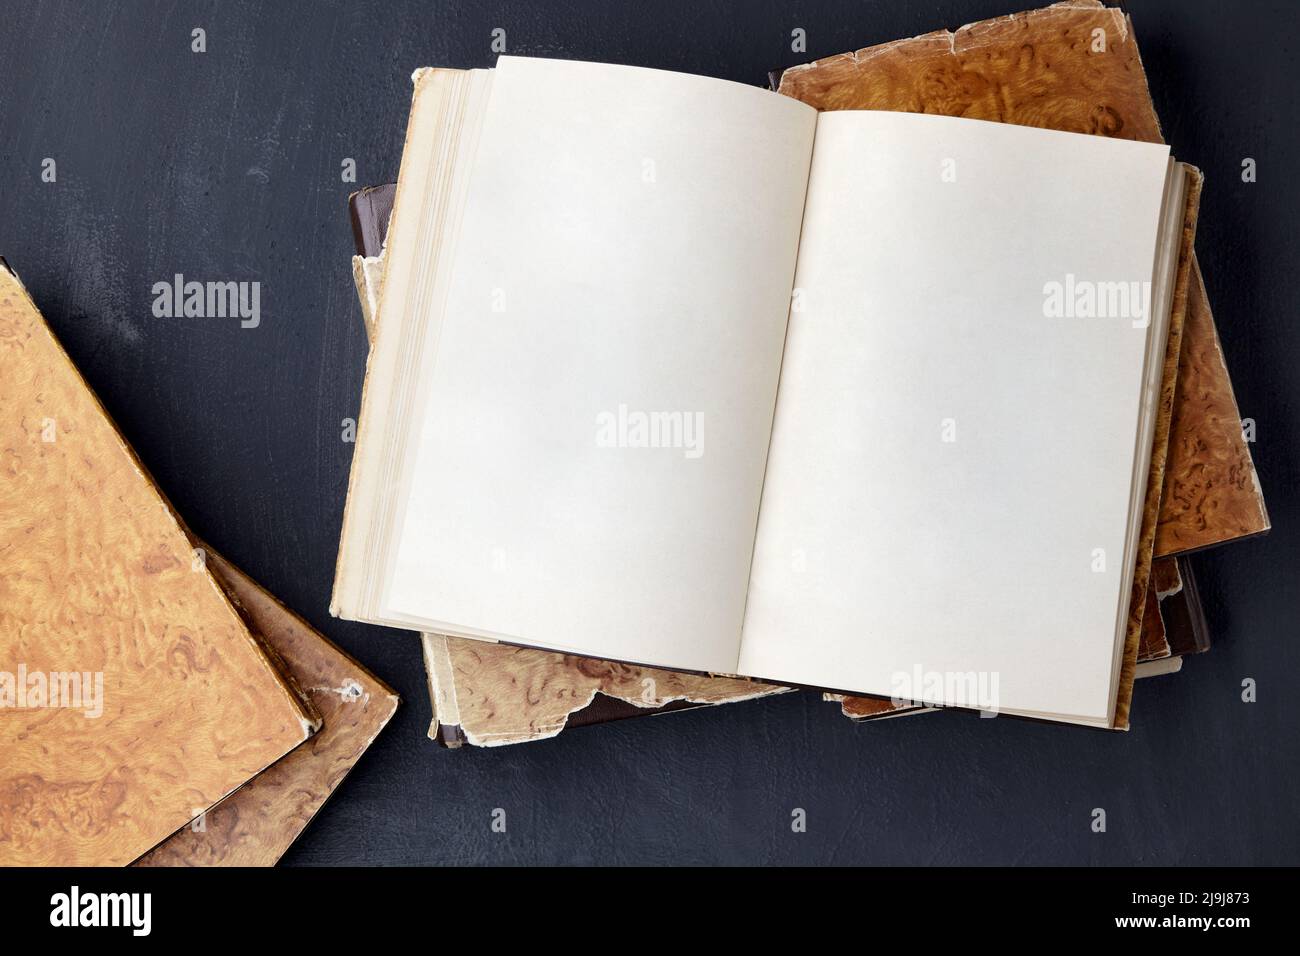 Vintage notepad book with blank pages lies on a stack of shabby books on a black concrete table Stock Photo